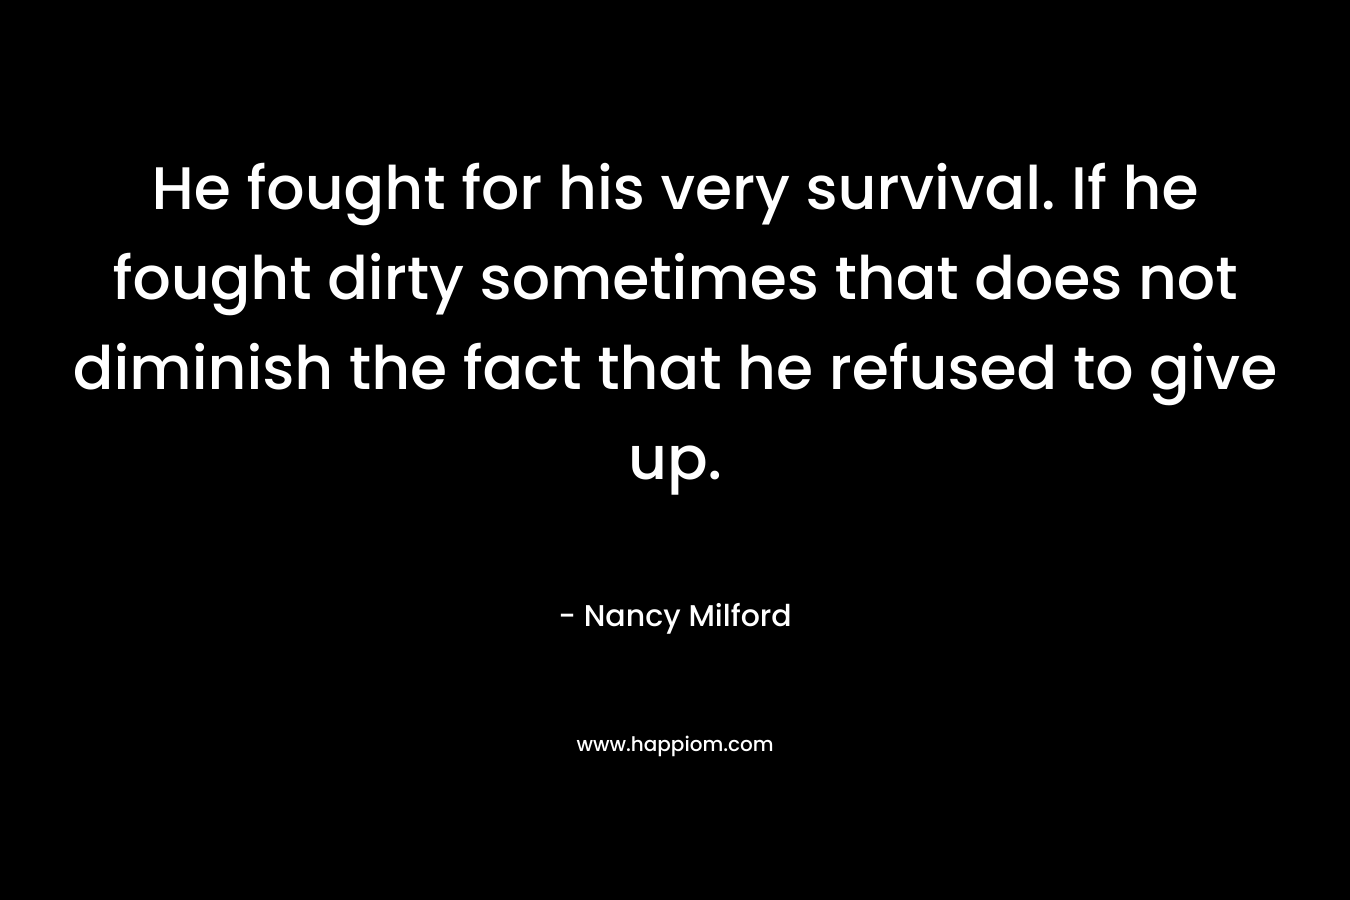 He fought for his very survival. If he fought dirty sometimes that does not diminish the fact that he refused to give up.